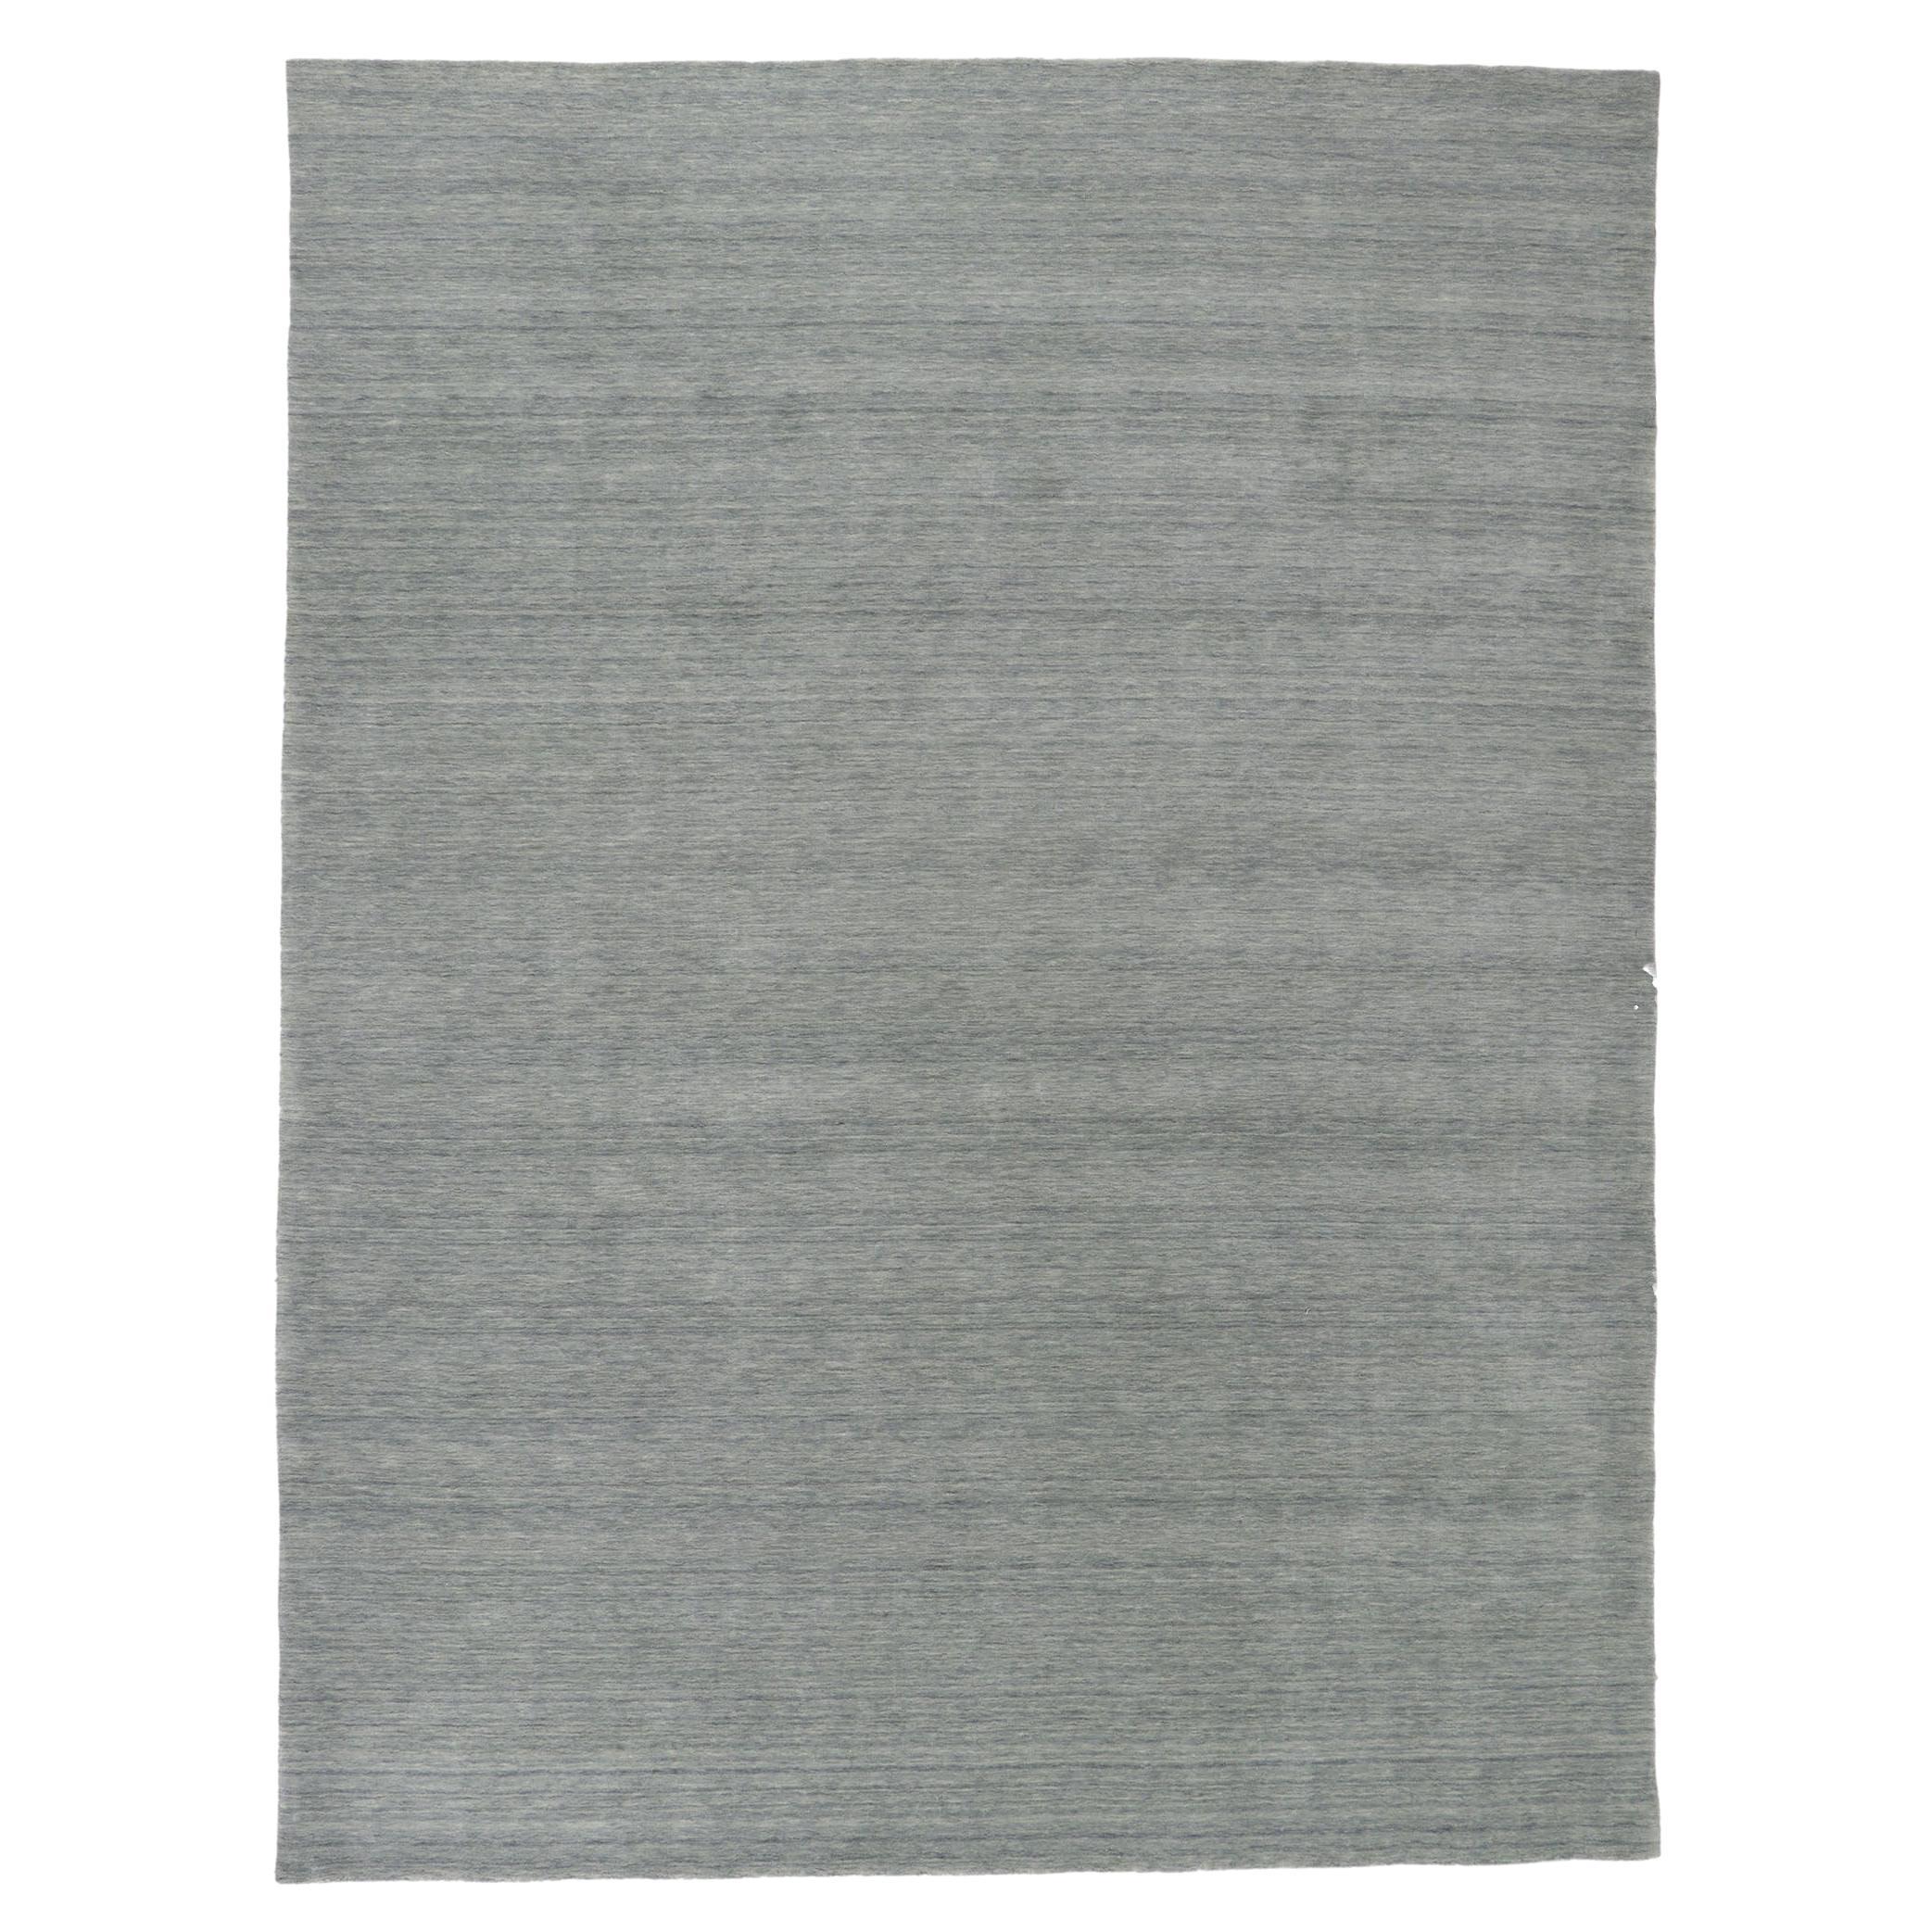 New Contemporary Gray Area Rug with Modern Style 